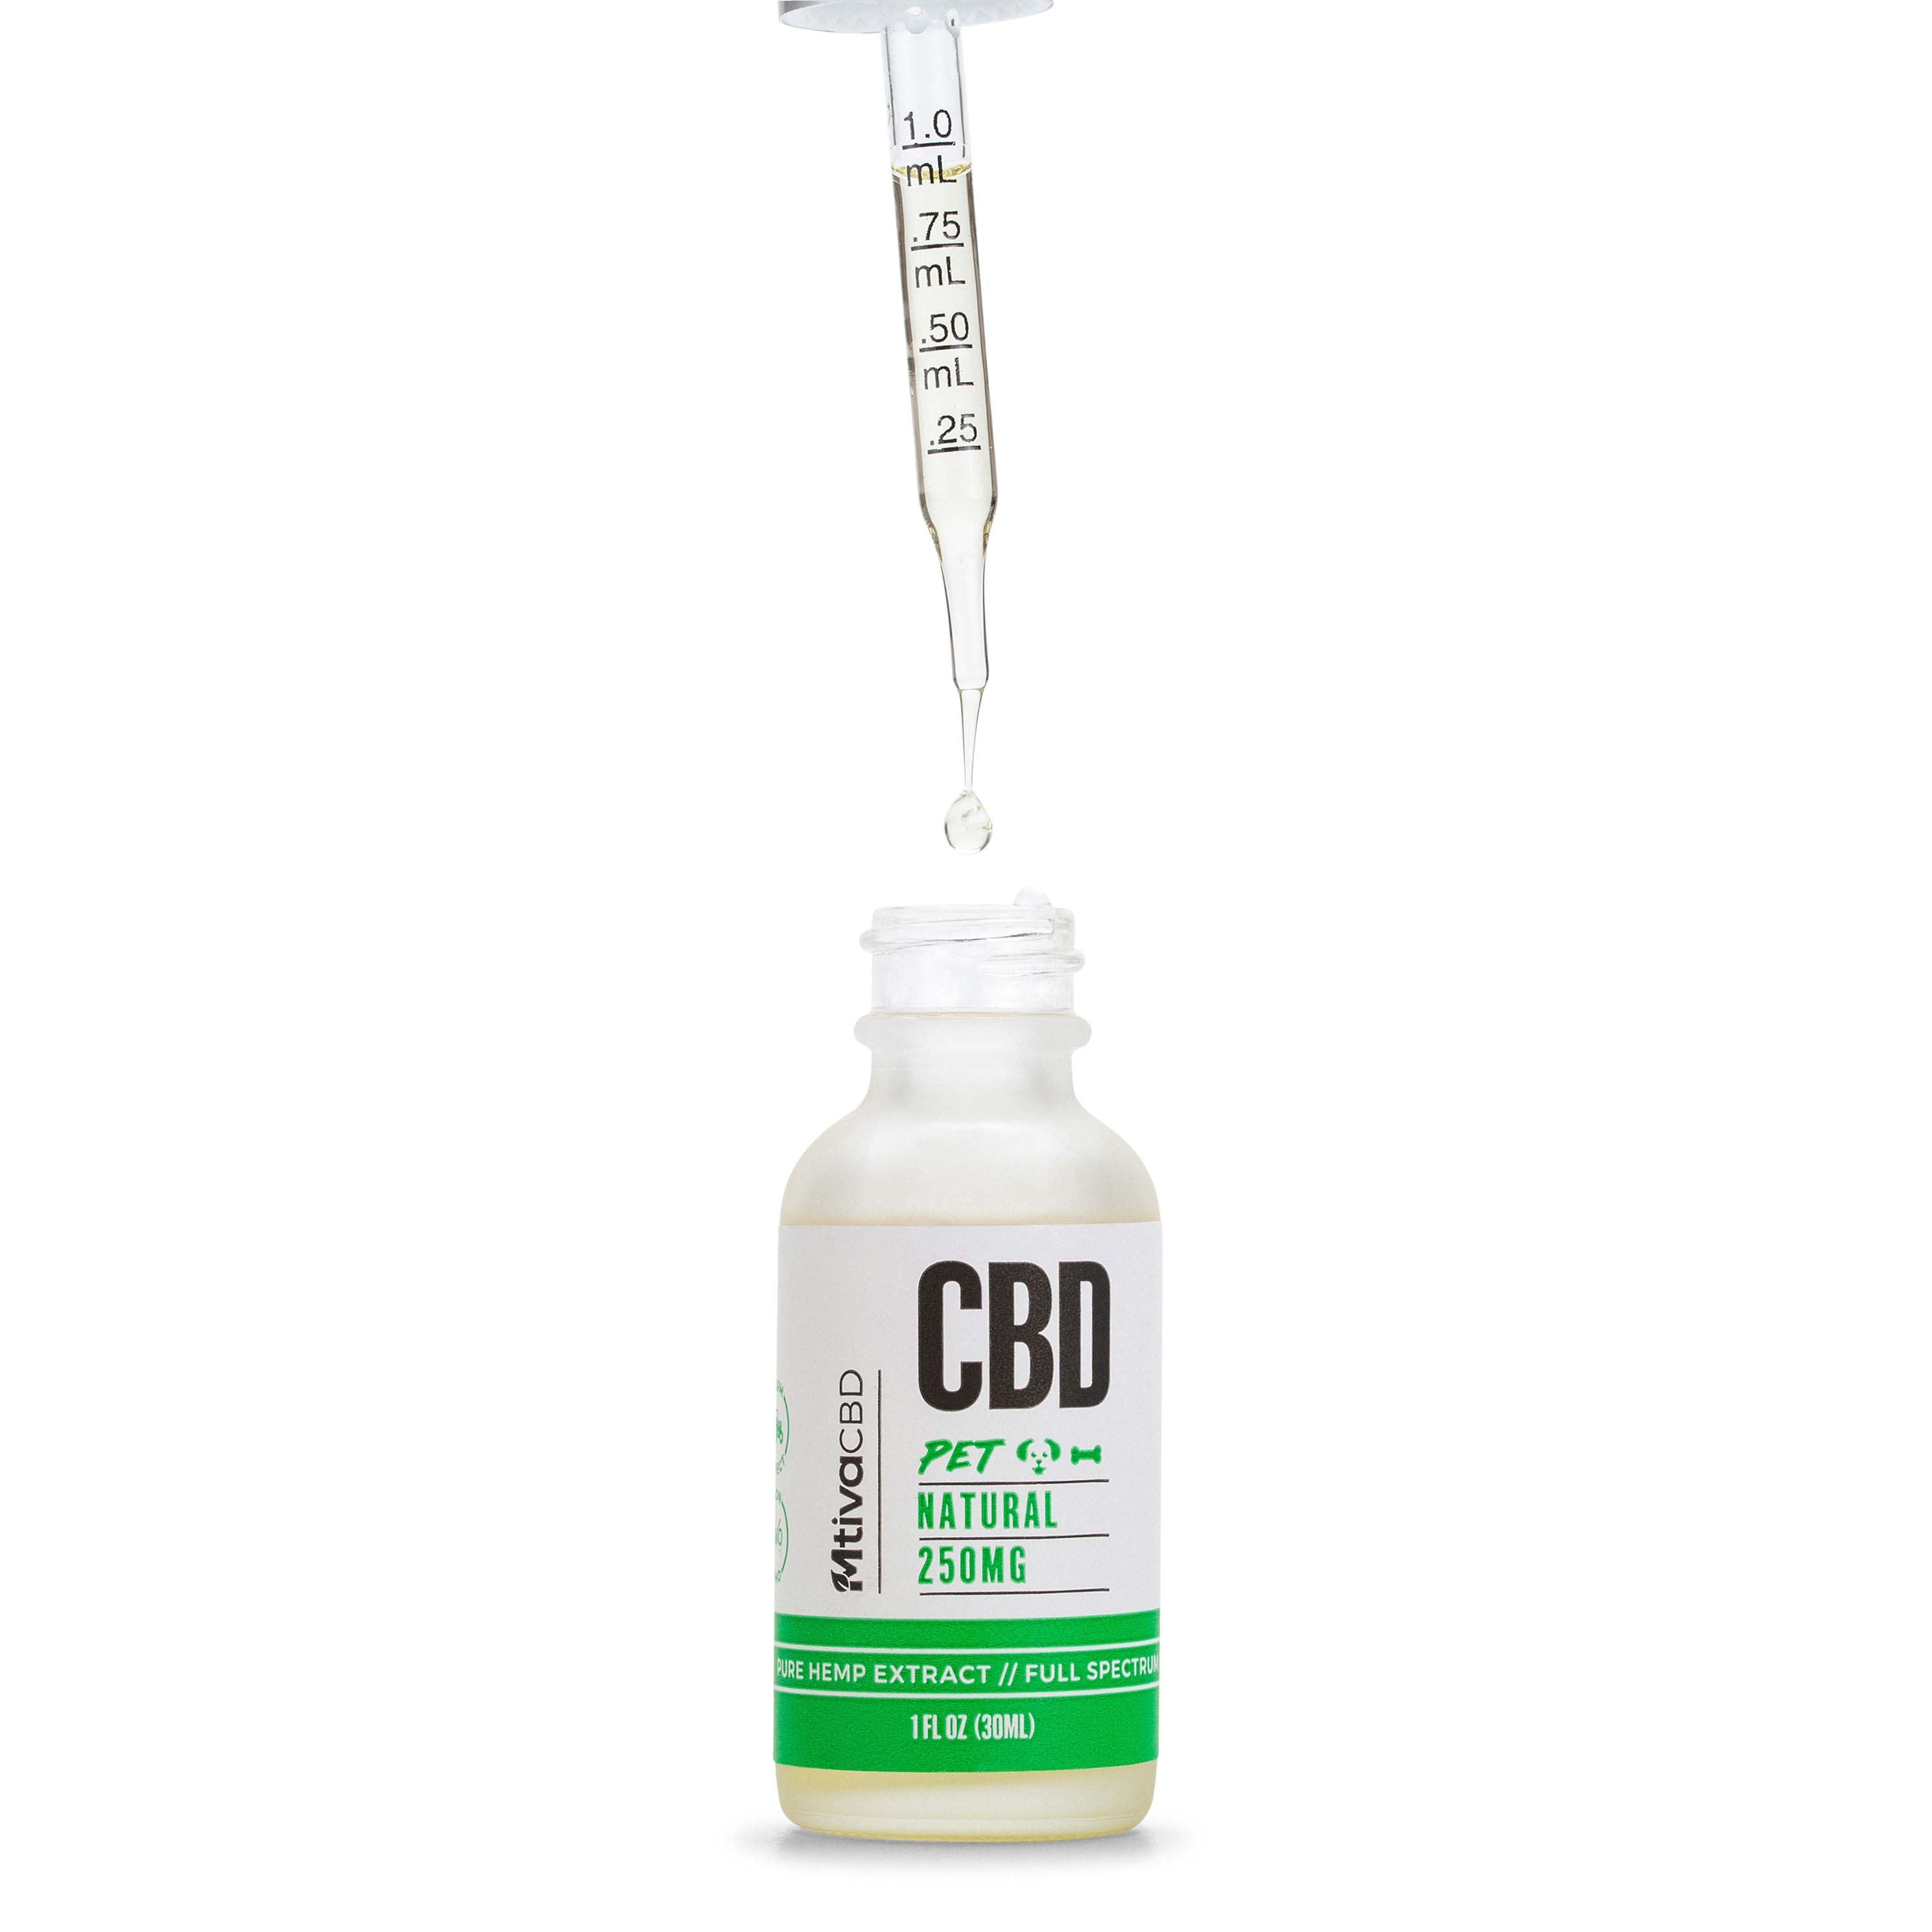 Buy our CBD products wholesale directly from our CBD hemp farm and save money.  CBD oils and tinctures, CBD topicals for pain, CBD gummies and top rated CBD flower.